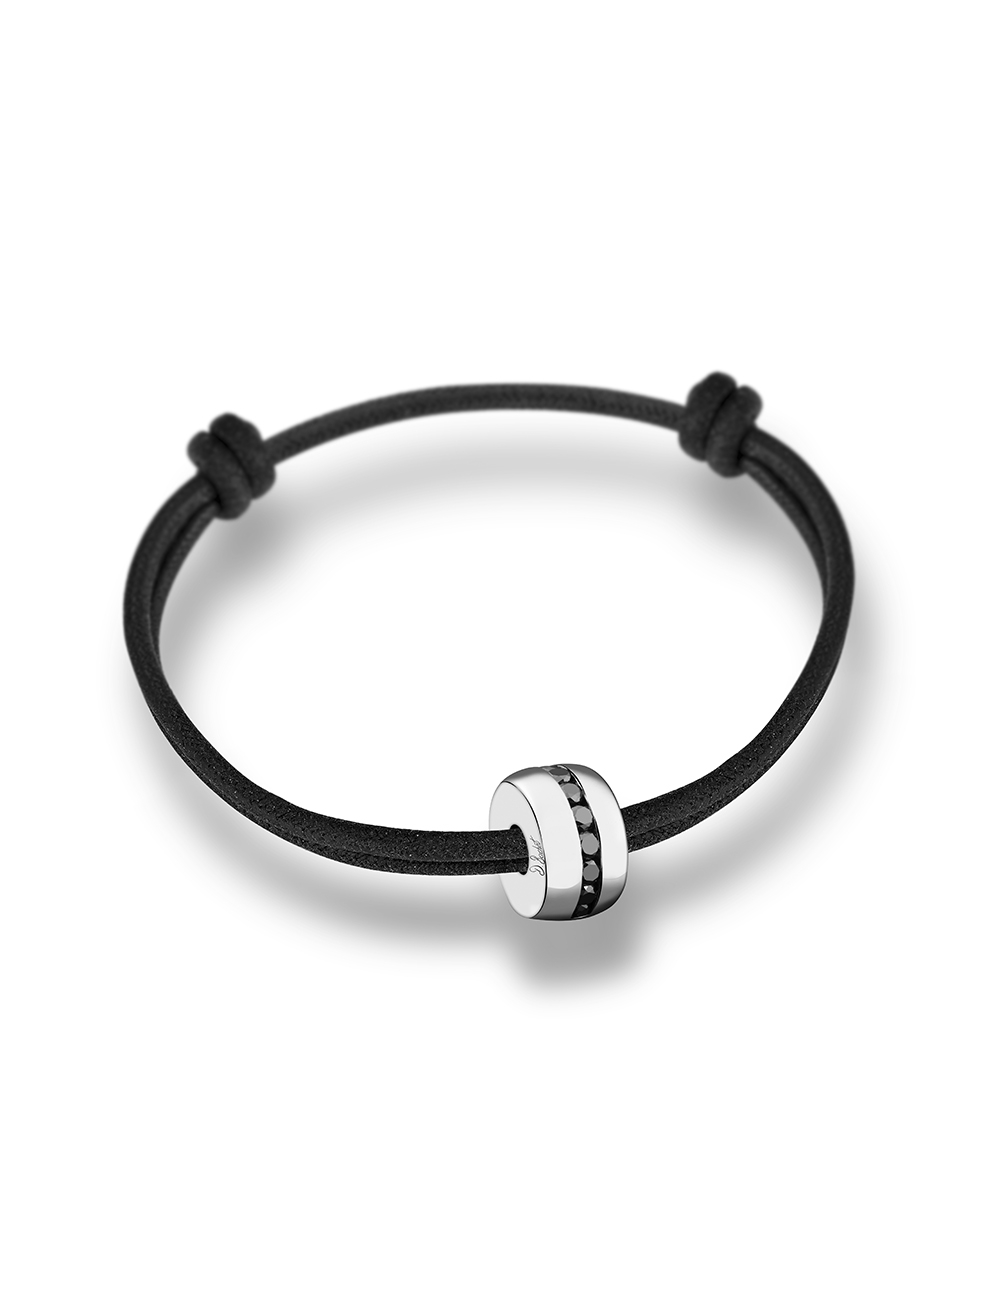 Men's bracelet in white gold 18k and black diamonds with sliding knots to wear every day